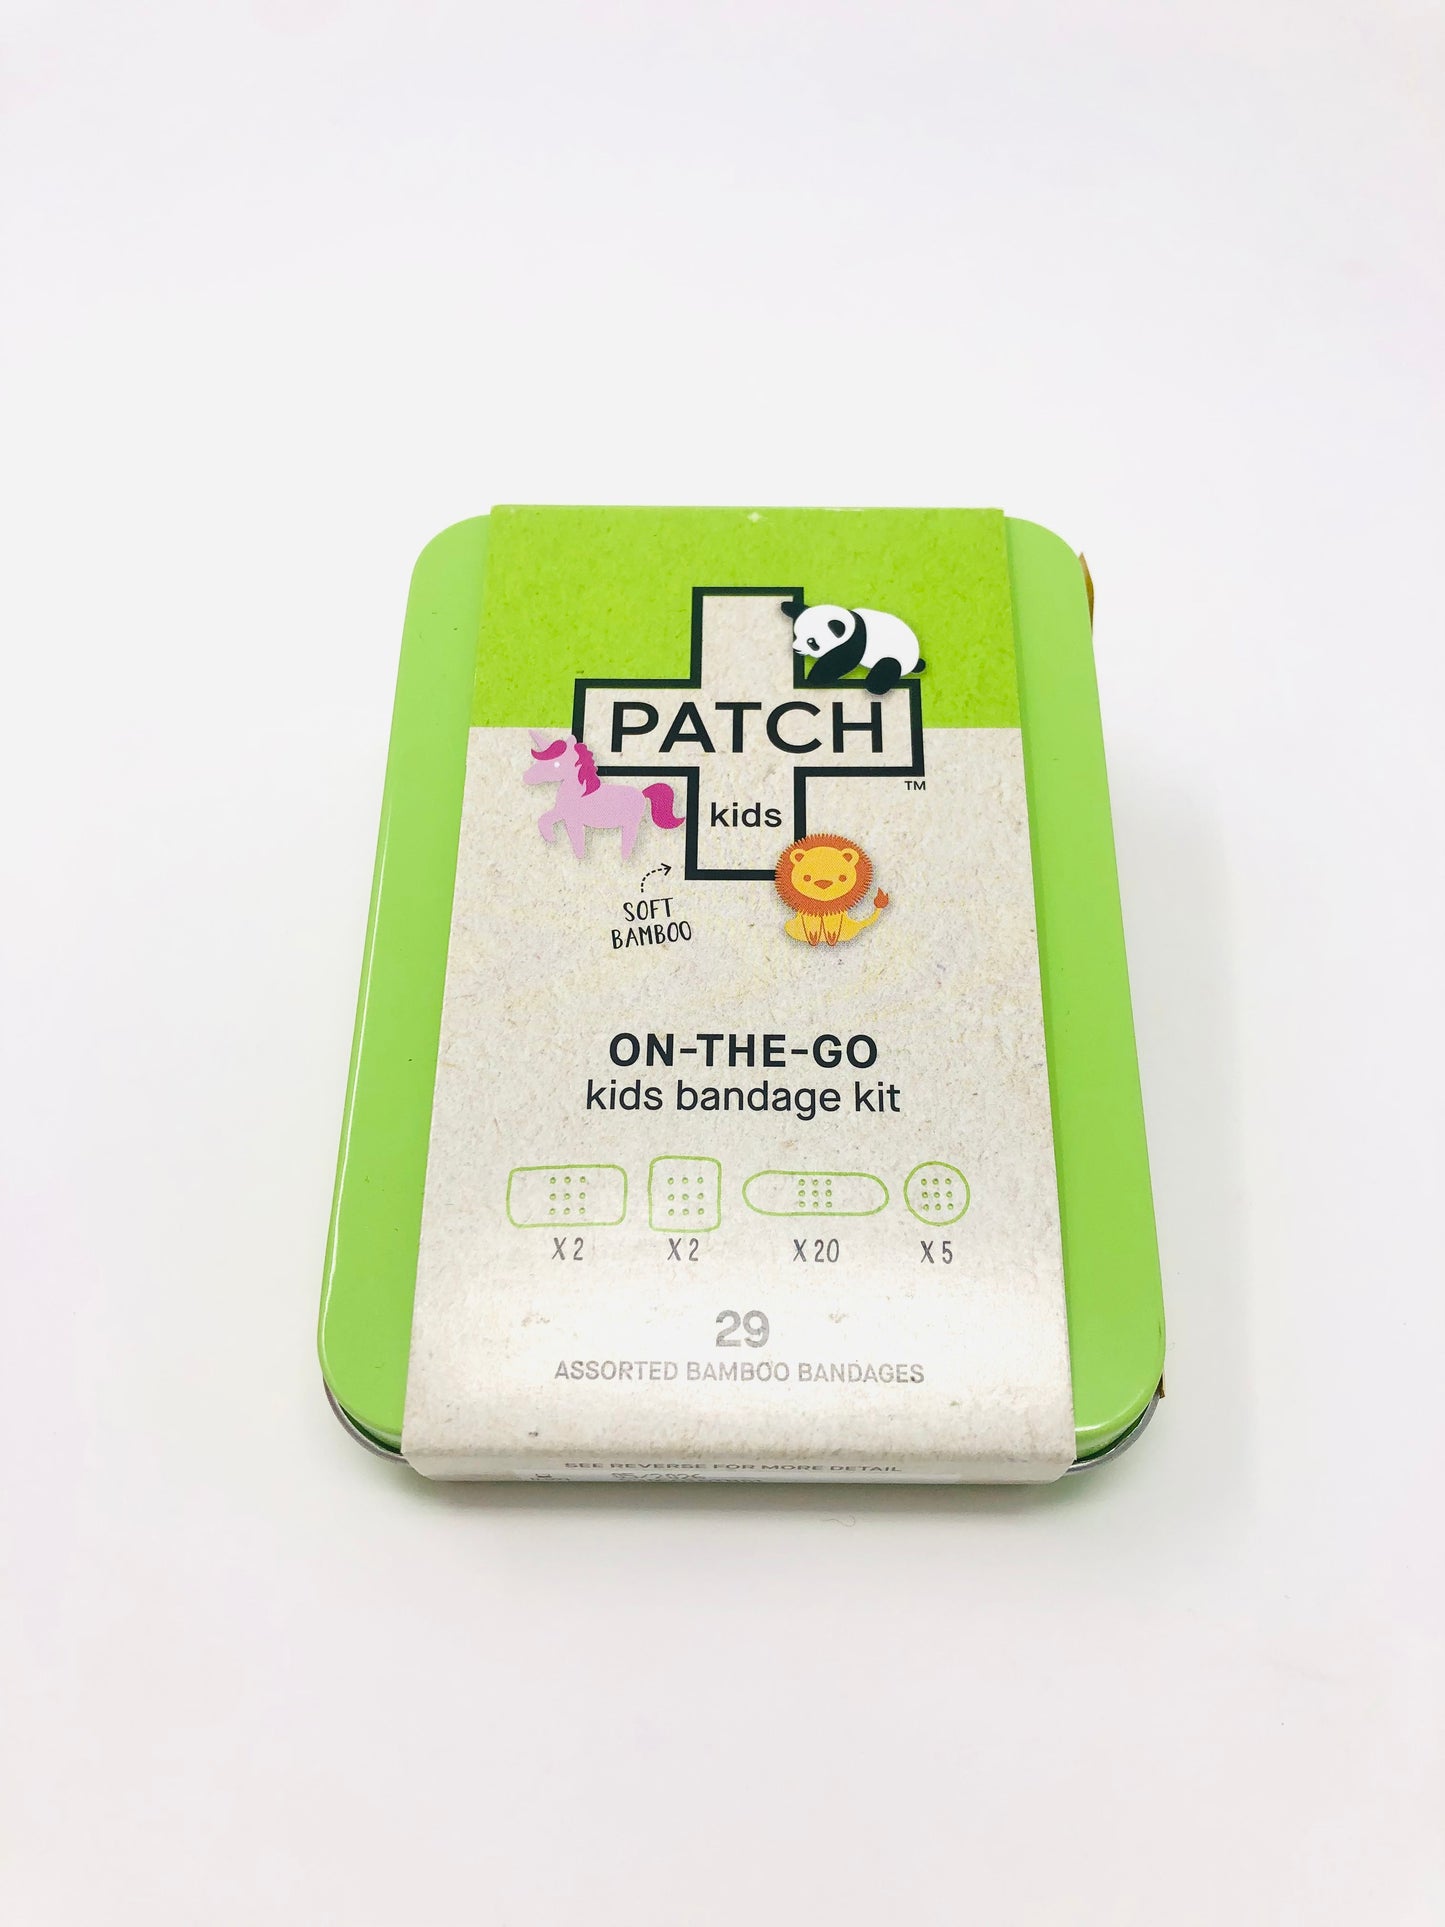 Bandages by PATCH